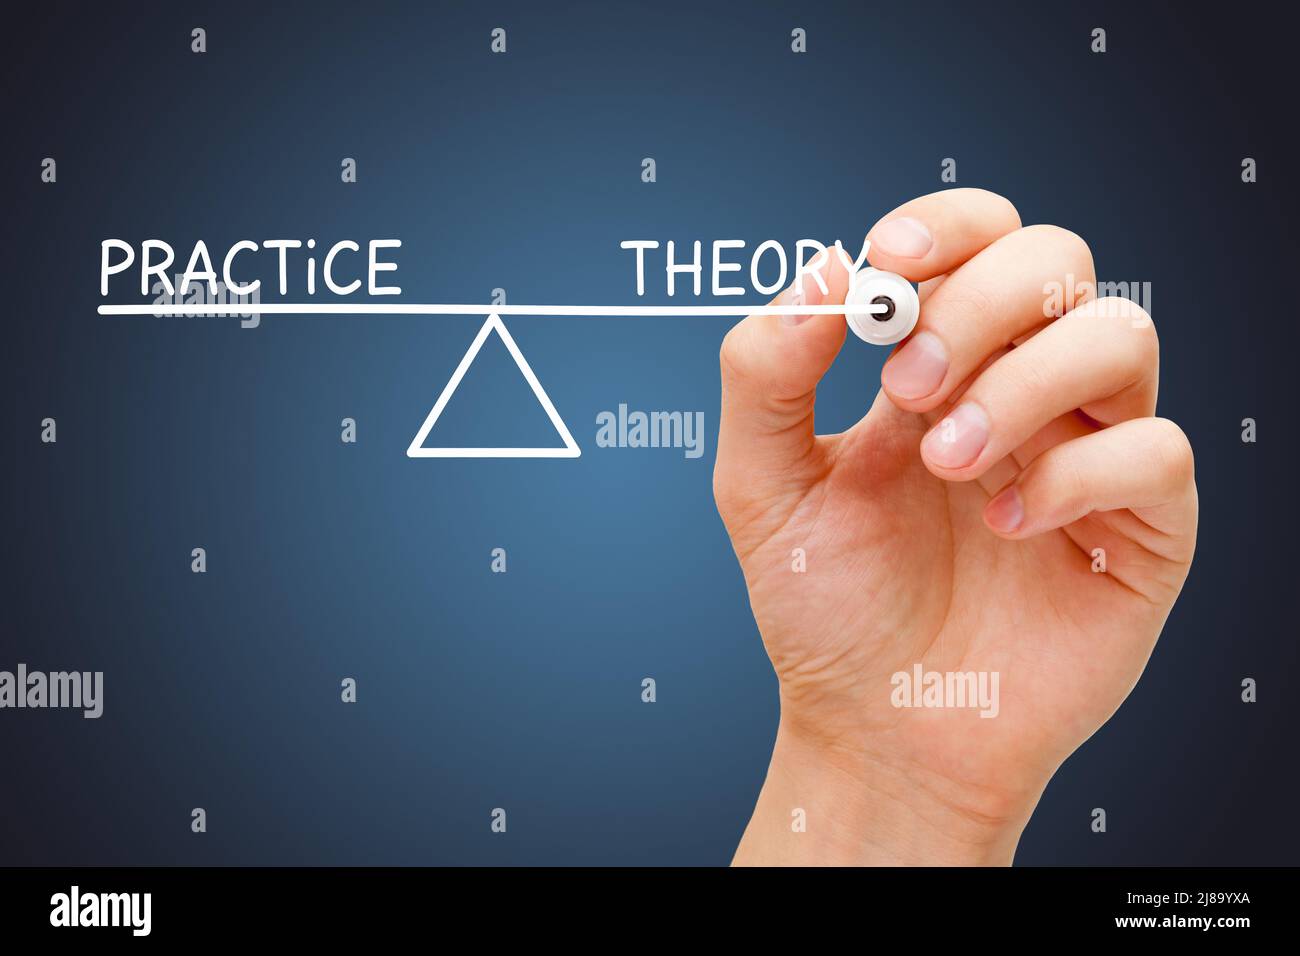 Hand drawing a business concept about the importance of Practice and Theory balance. Stock Photo